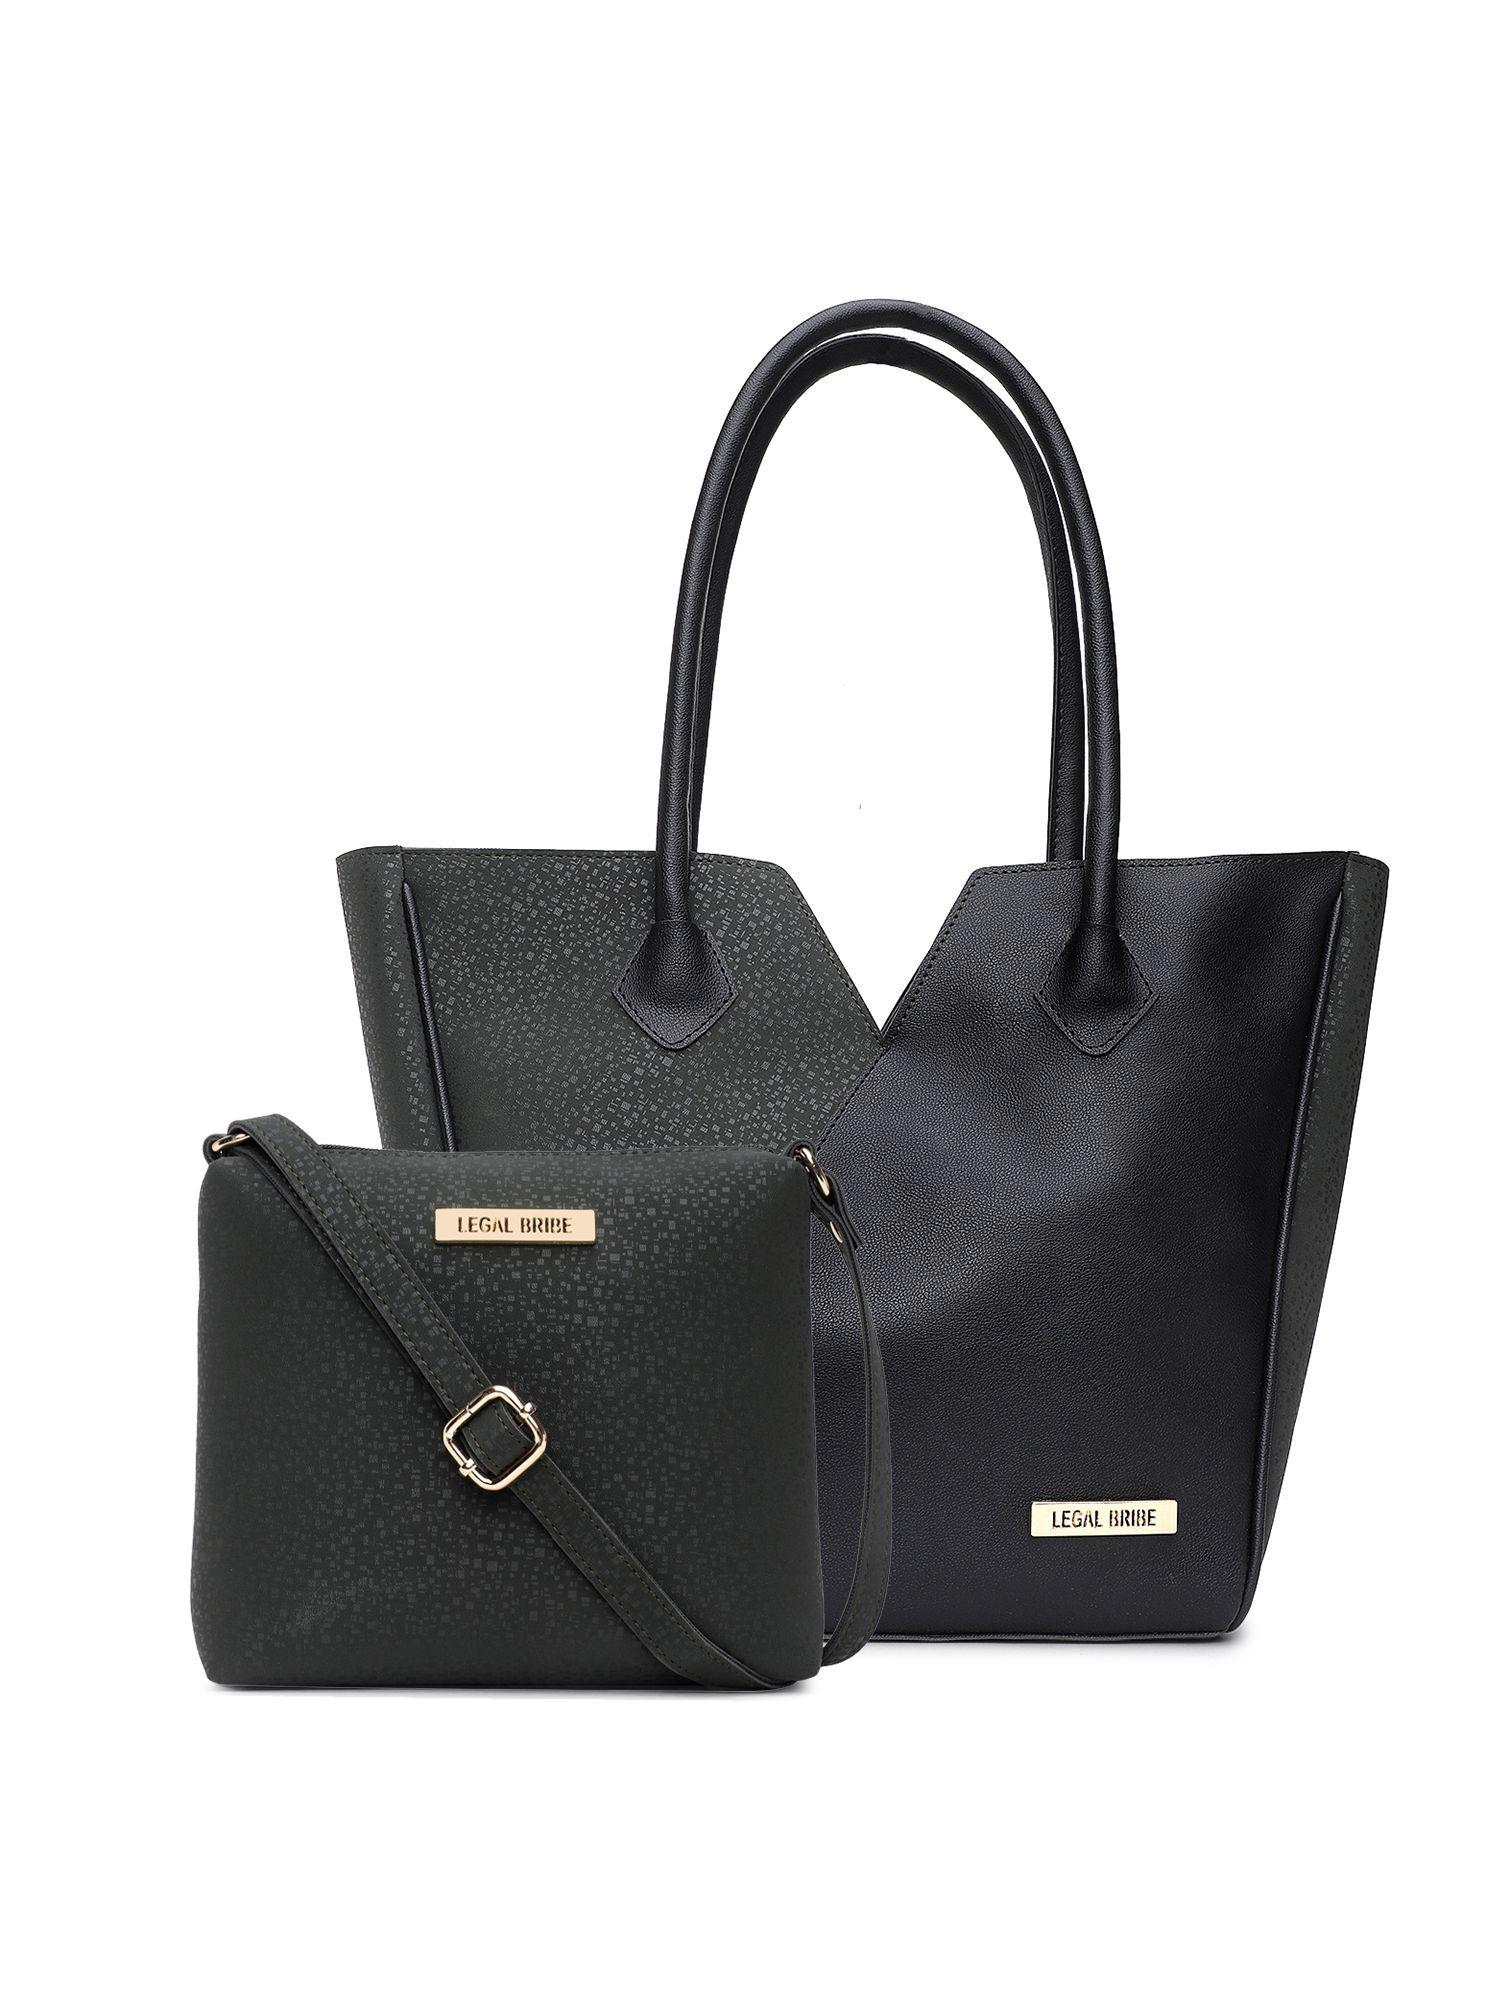 colorblock tote bag combo of 2 - olive